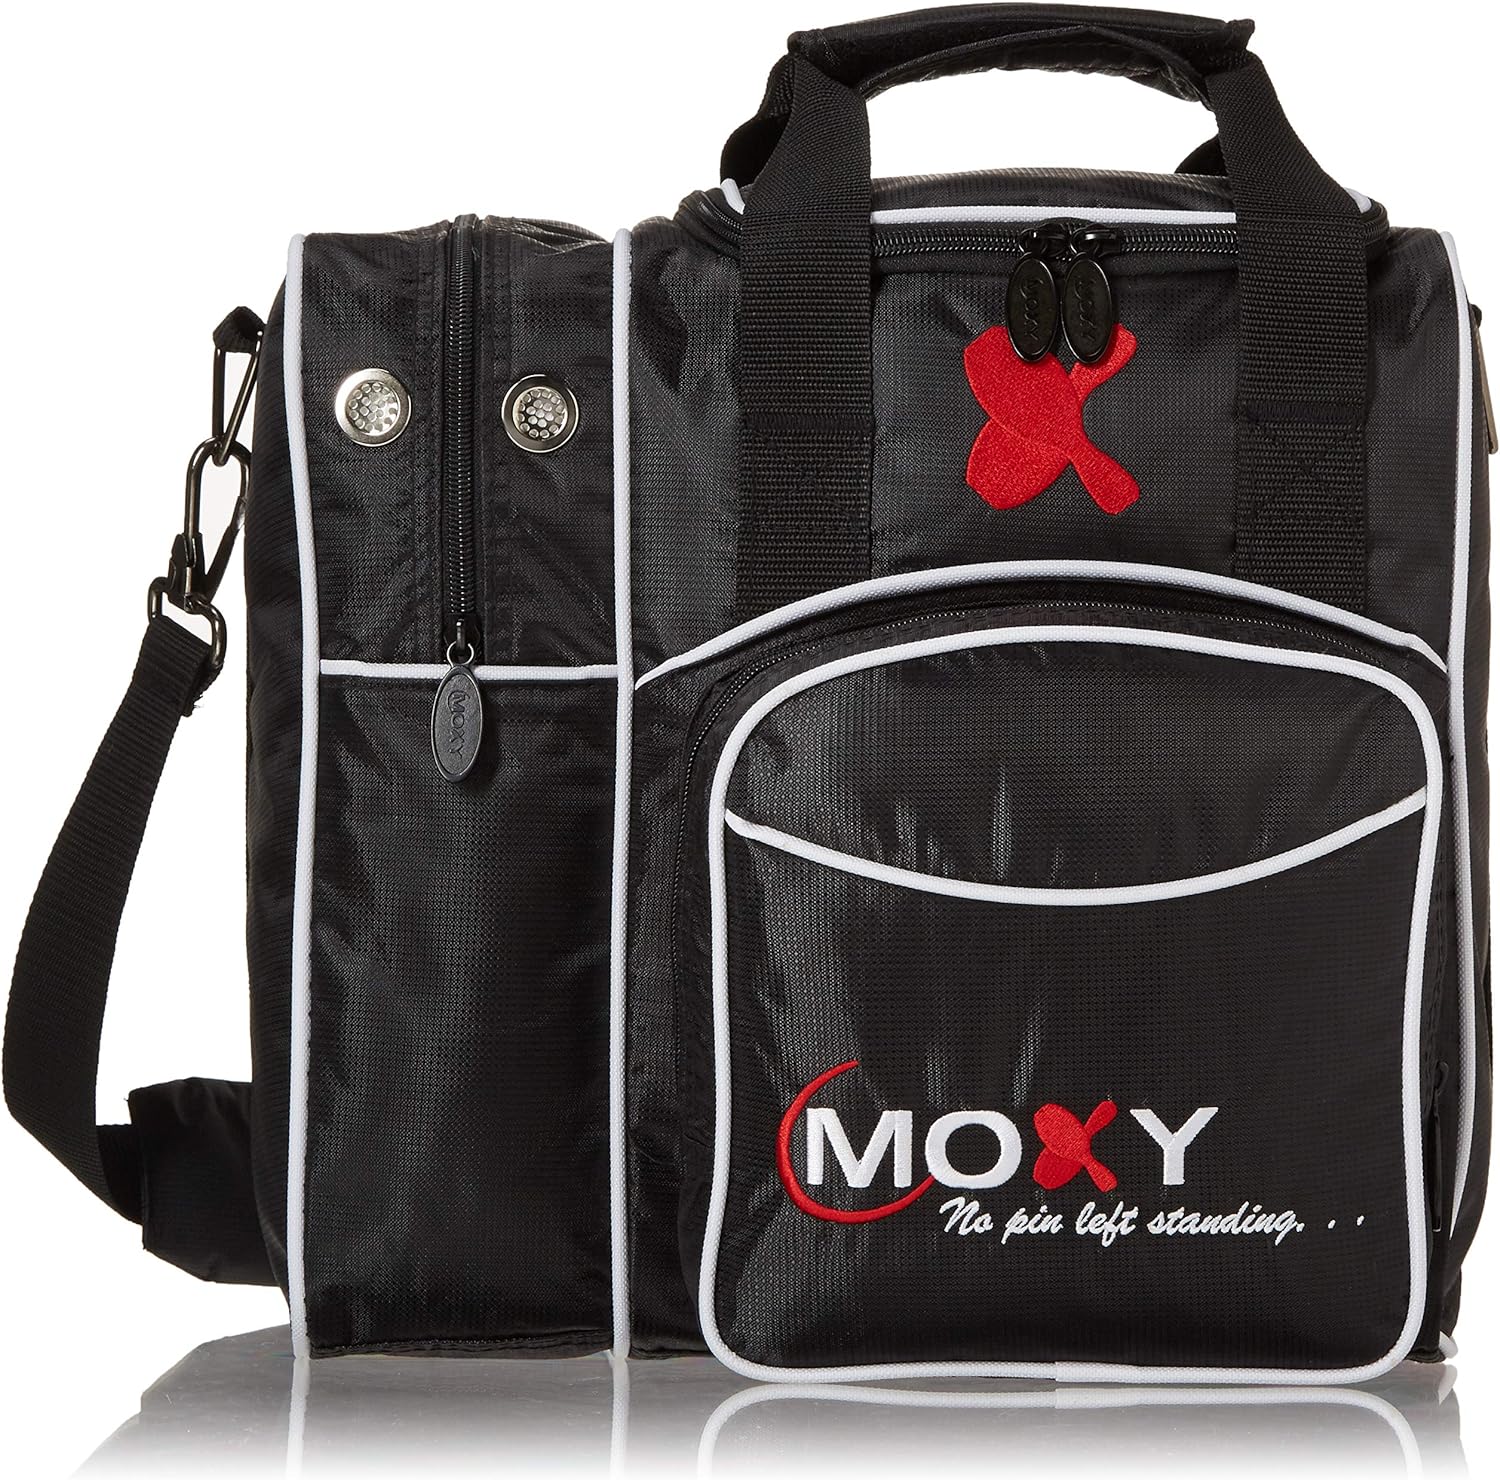 Moxy Duckpin Deluxe Tote Bowling Bag- Black